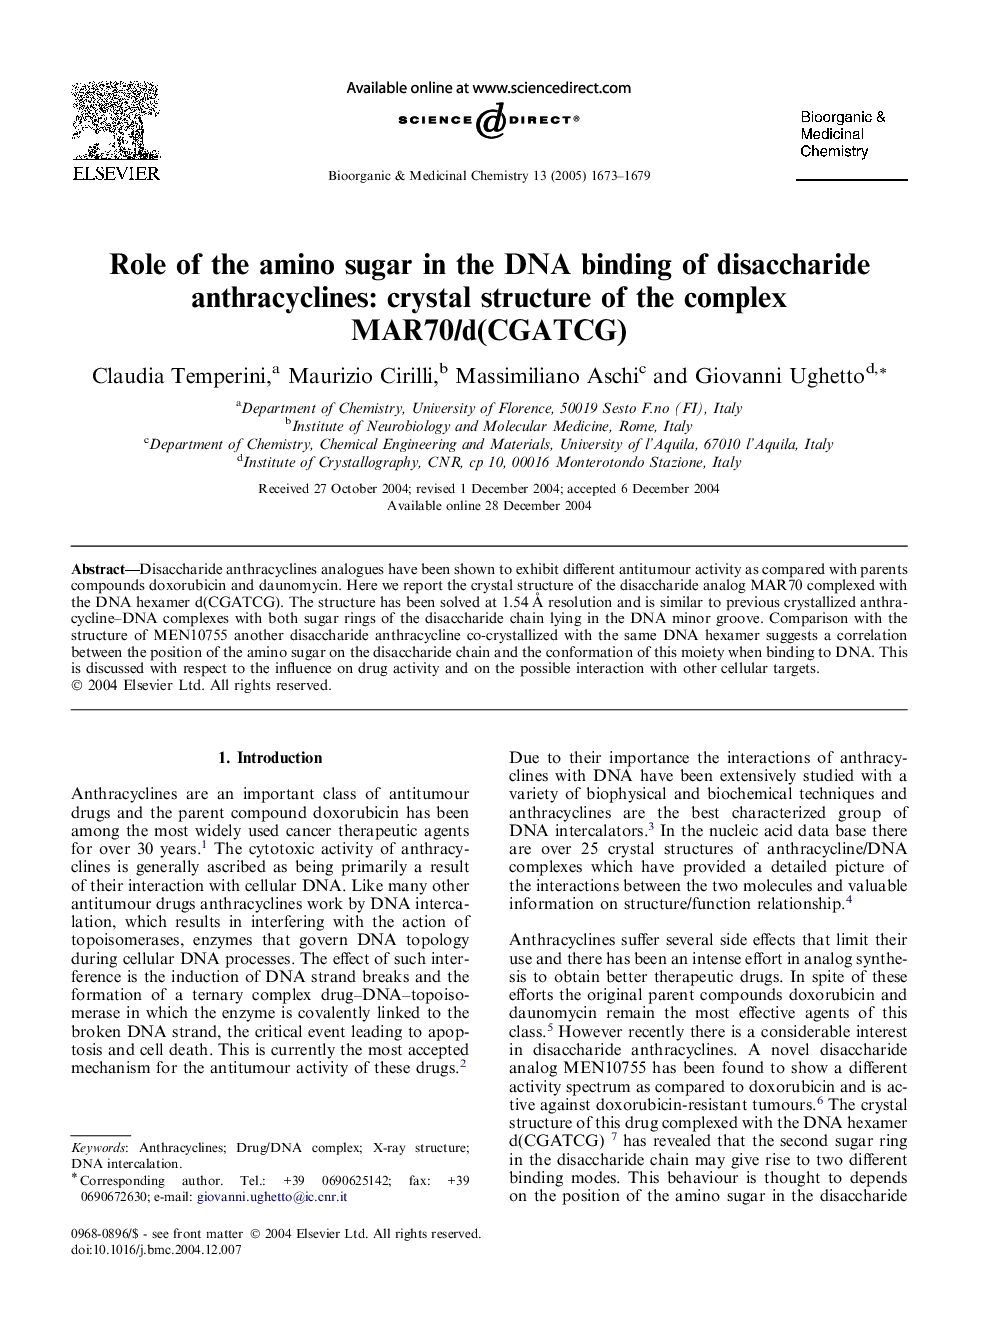 Role of the amino sugar in the DNA binding of disaccharide anthracyclines: crystal structure of the complex MAR70/d(CGATCG)